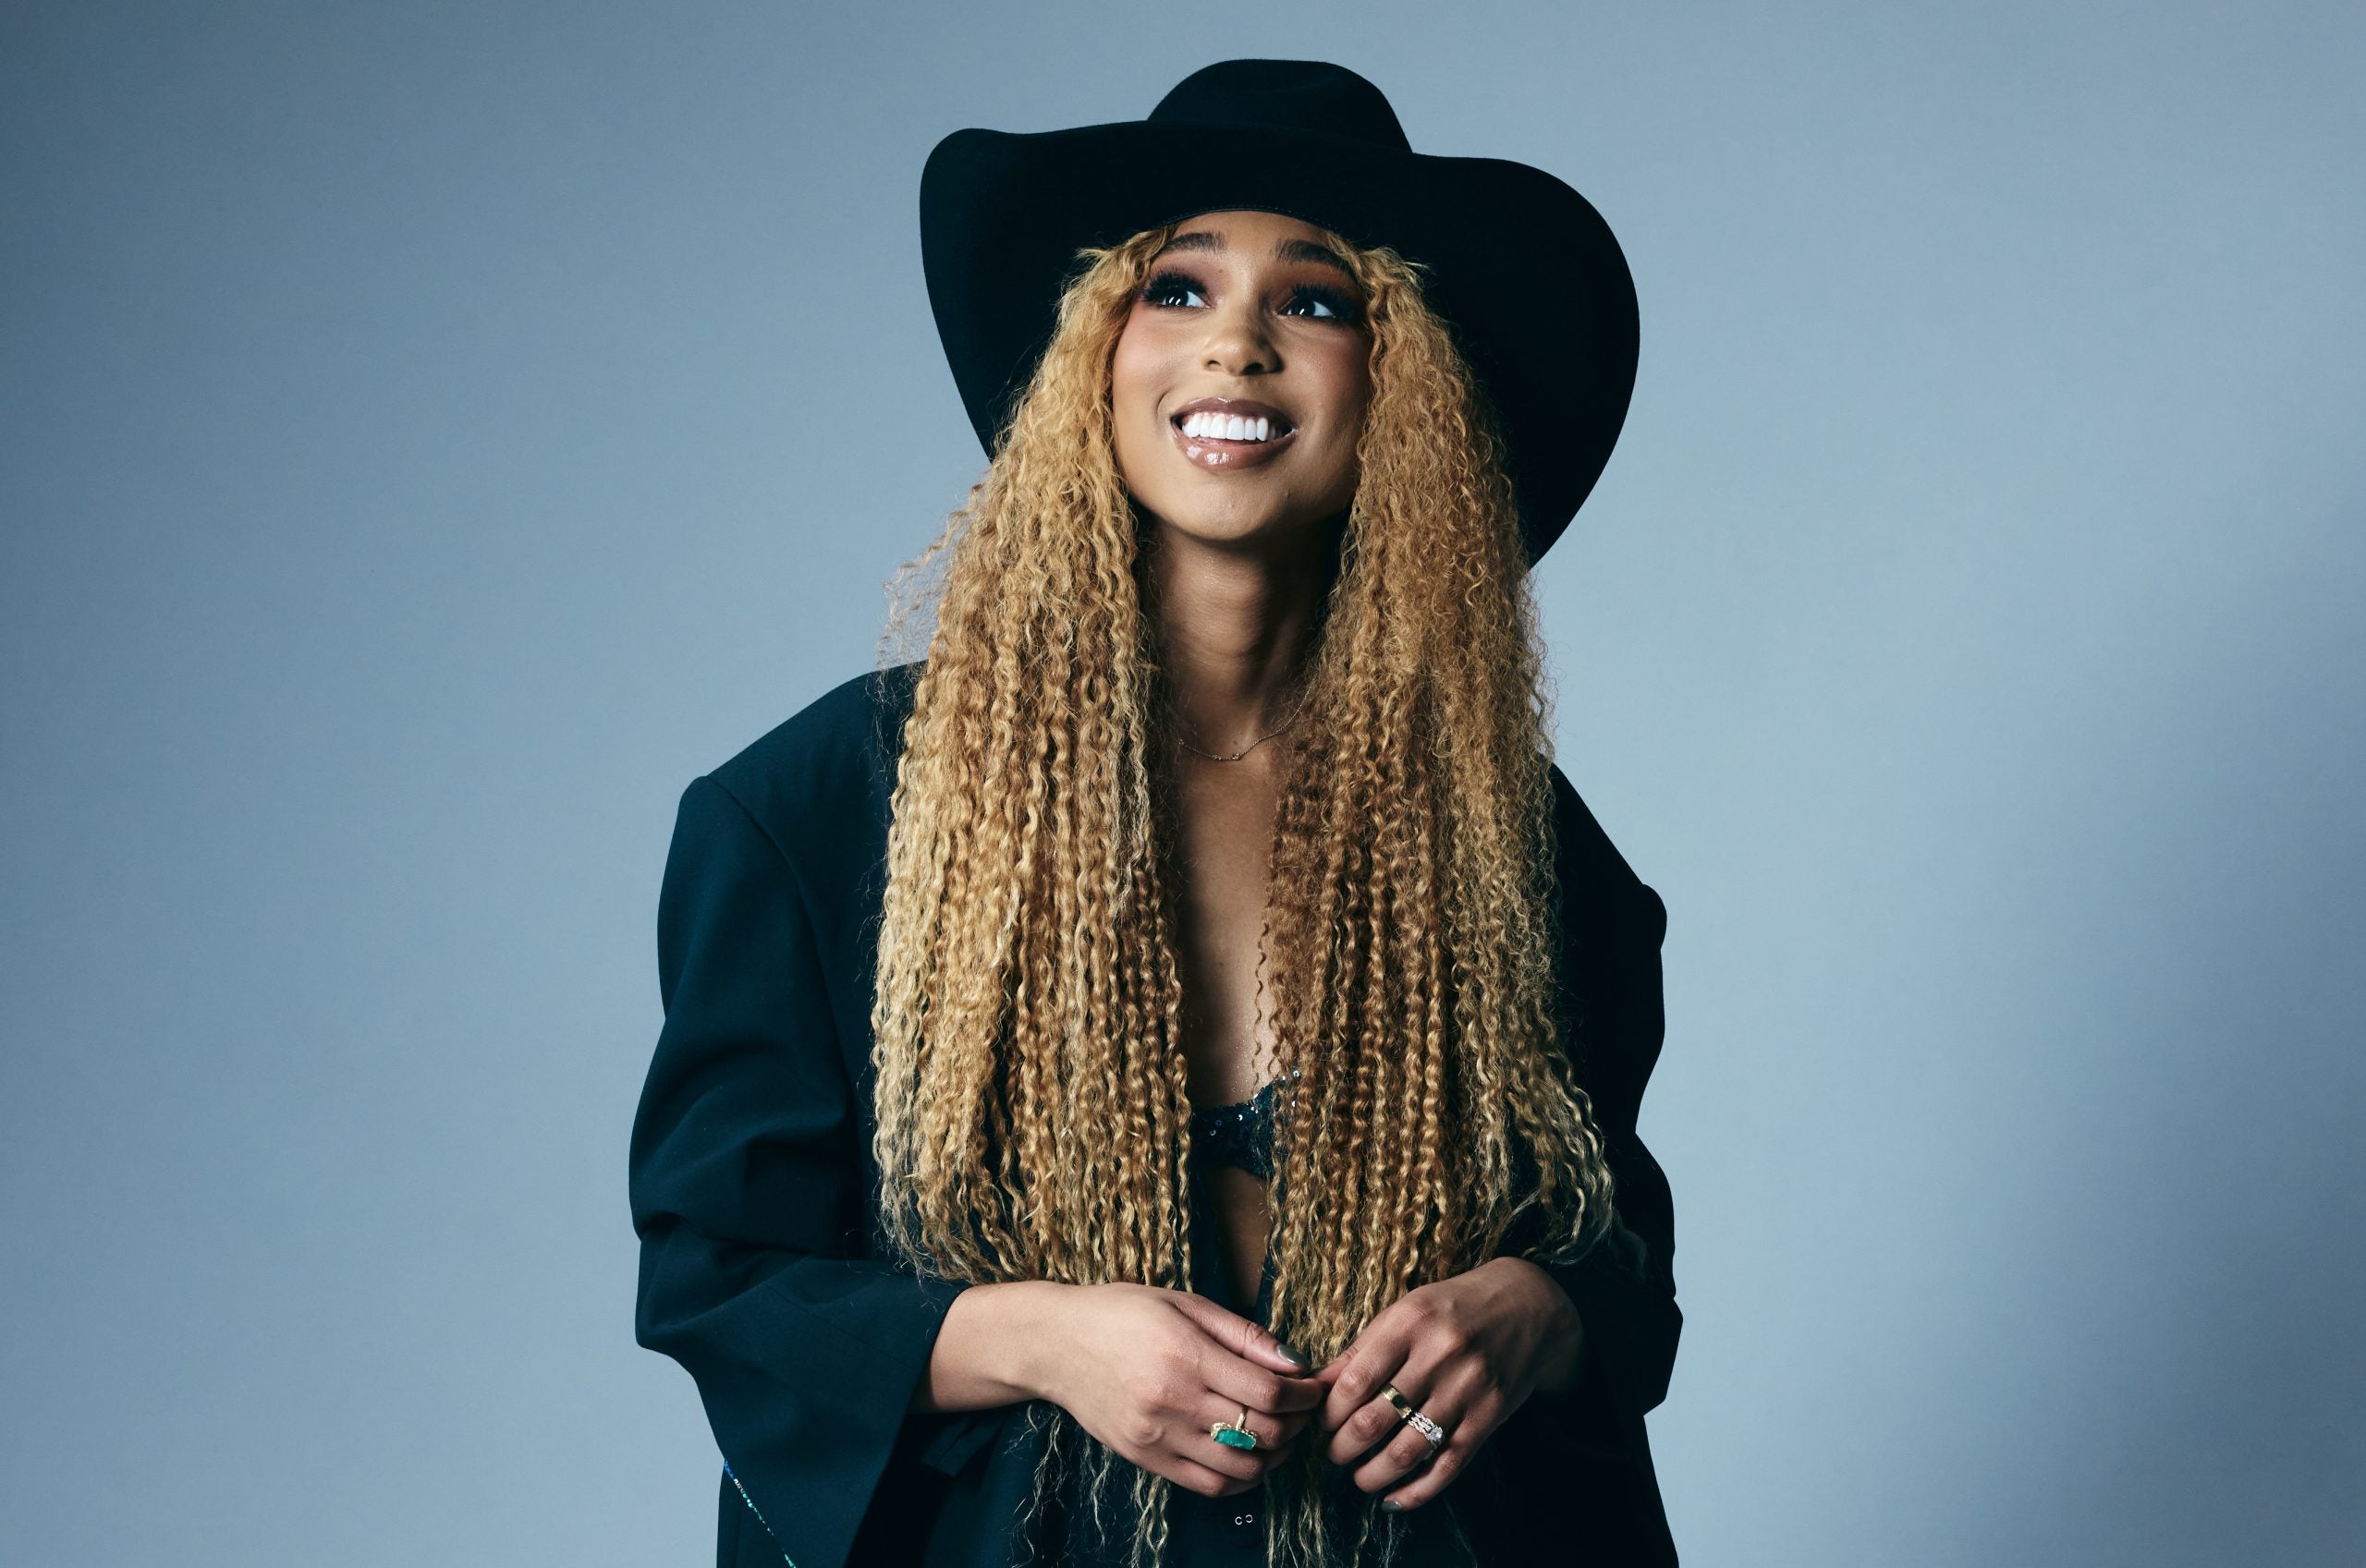 How Tiera Kennedy's 'Cowgirl' Grit Made Her Nashville's Sweetheart